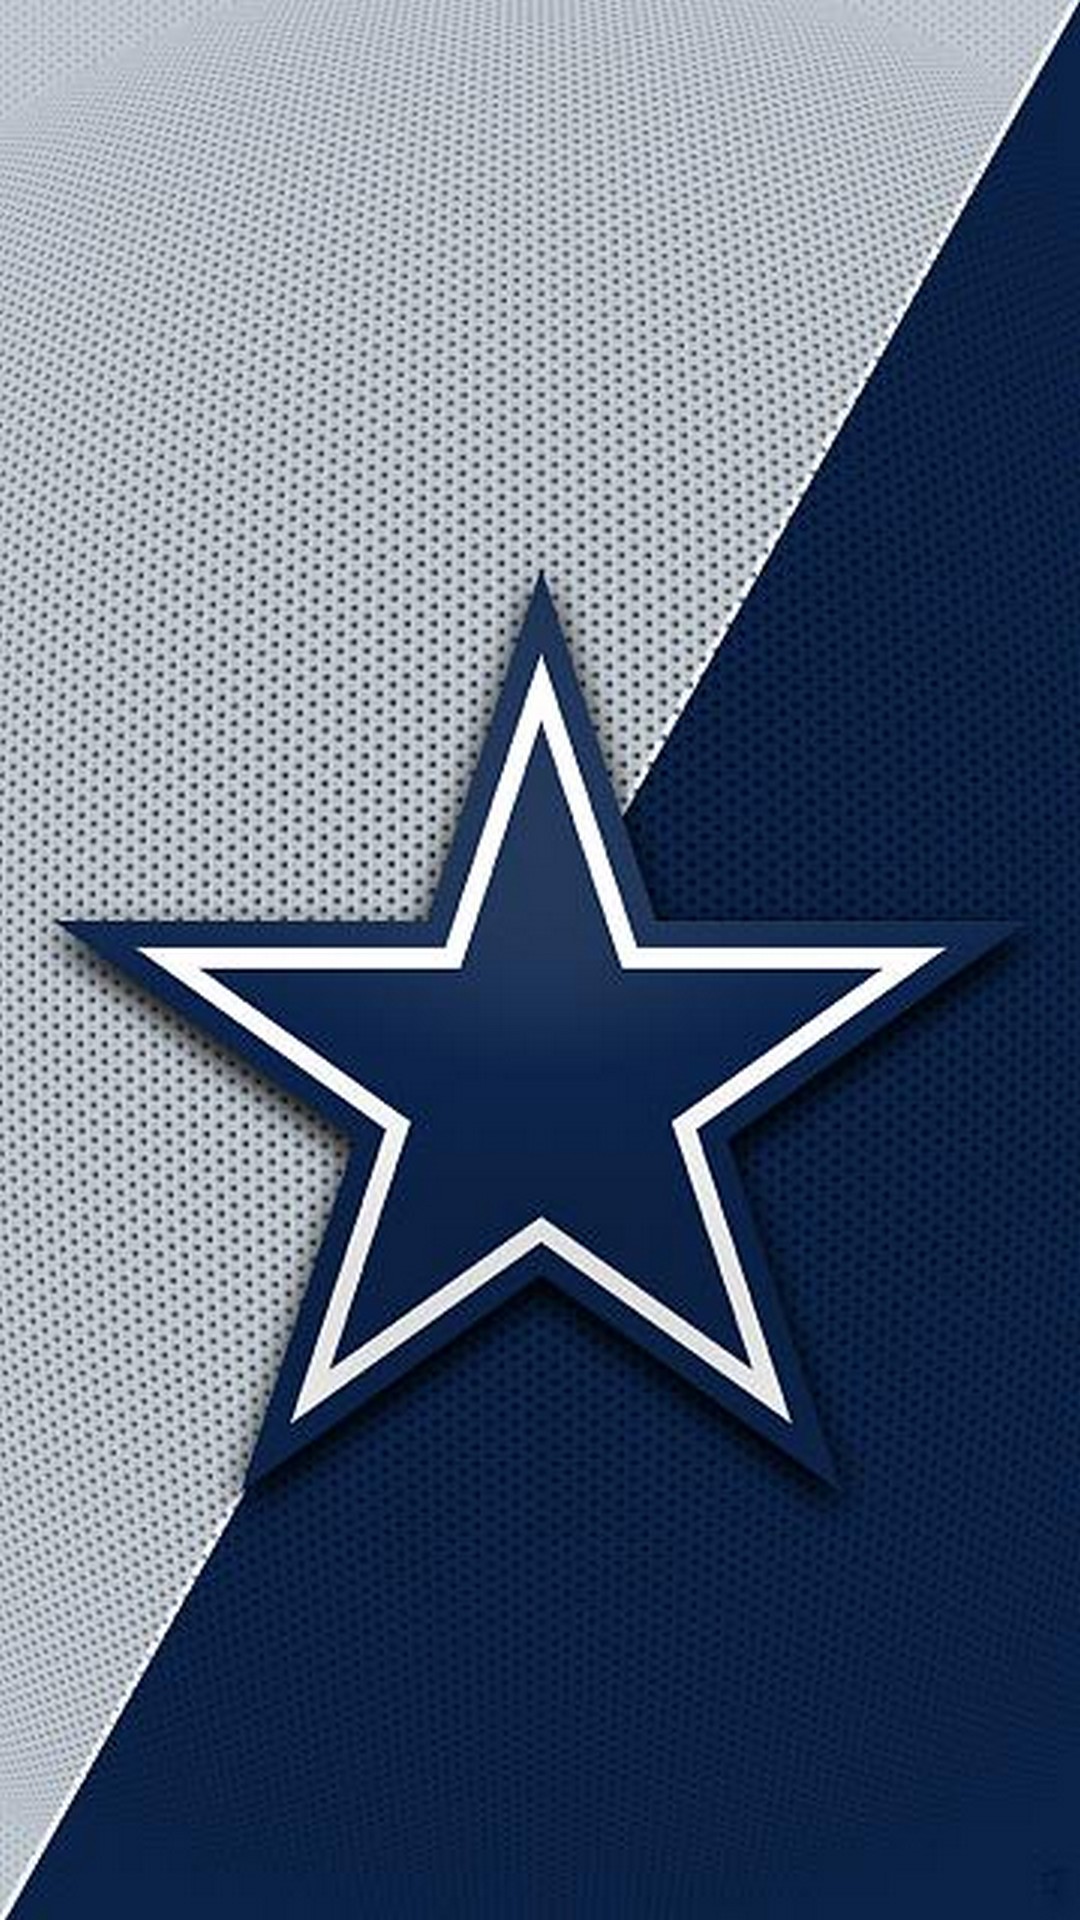 Dallas Cowboys iPhone Wallpaper Design with high-resolution 1080x1920 pixel. Download and set as wallpaper for Apple iPhone X, XS Max, XR, 8, 7, 6, SE, iPad, Android